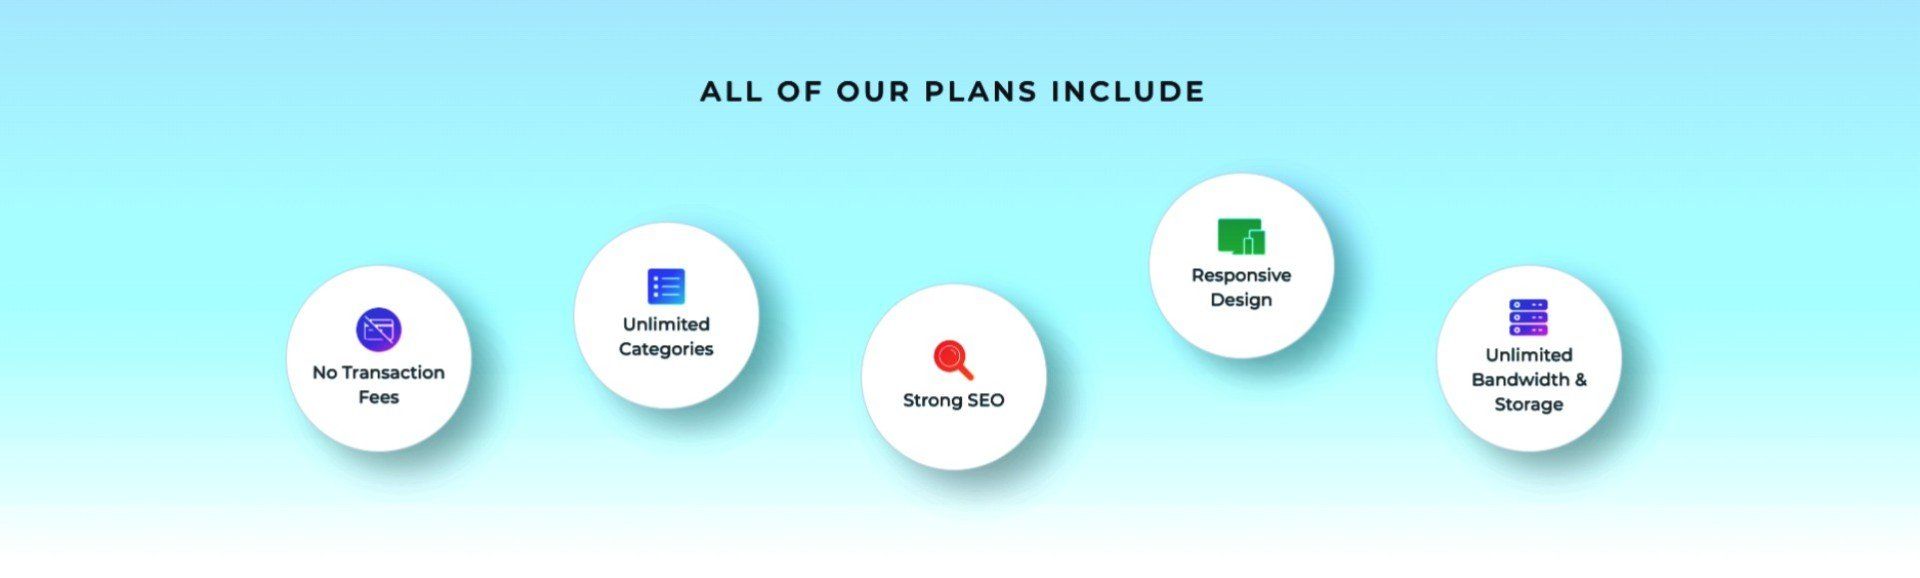 eCommerce plans include